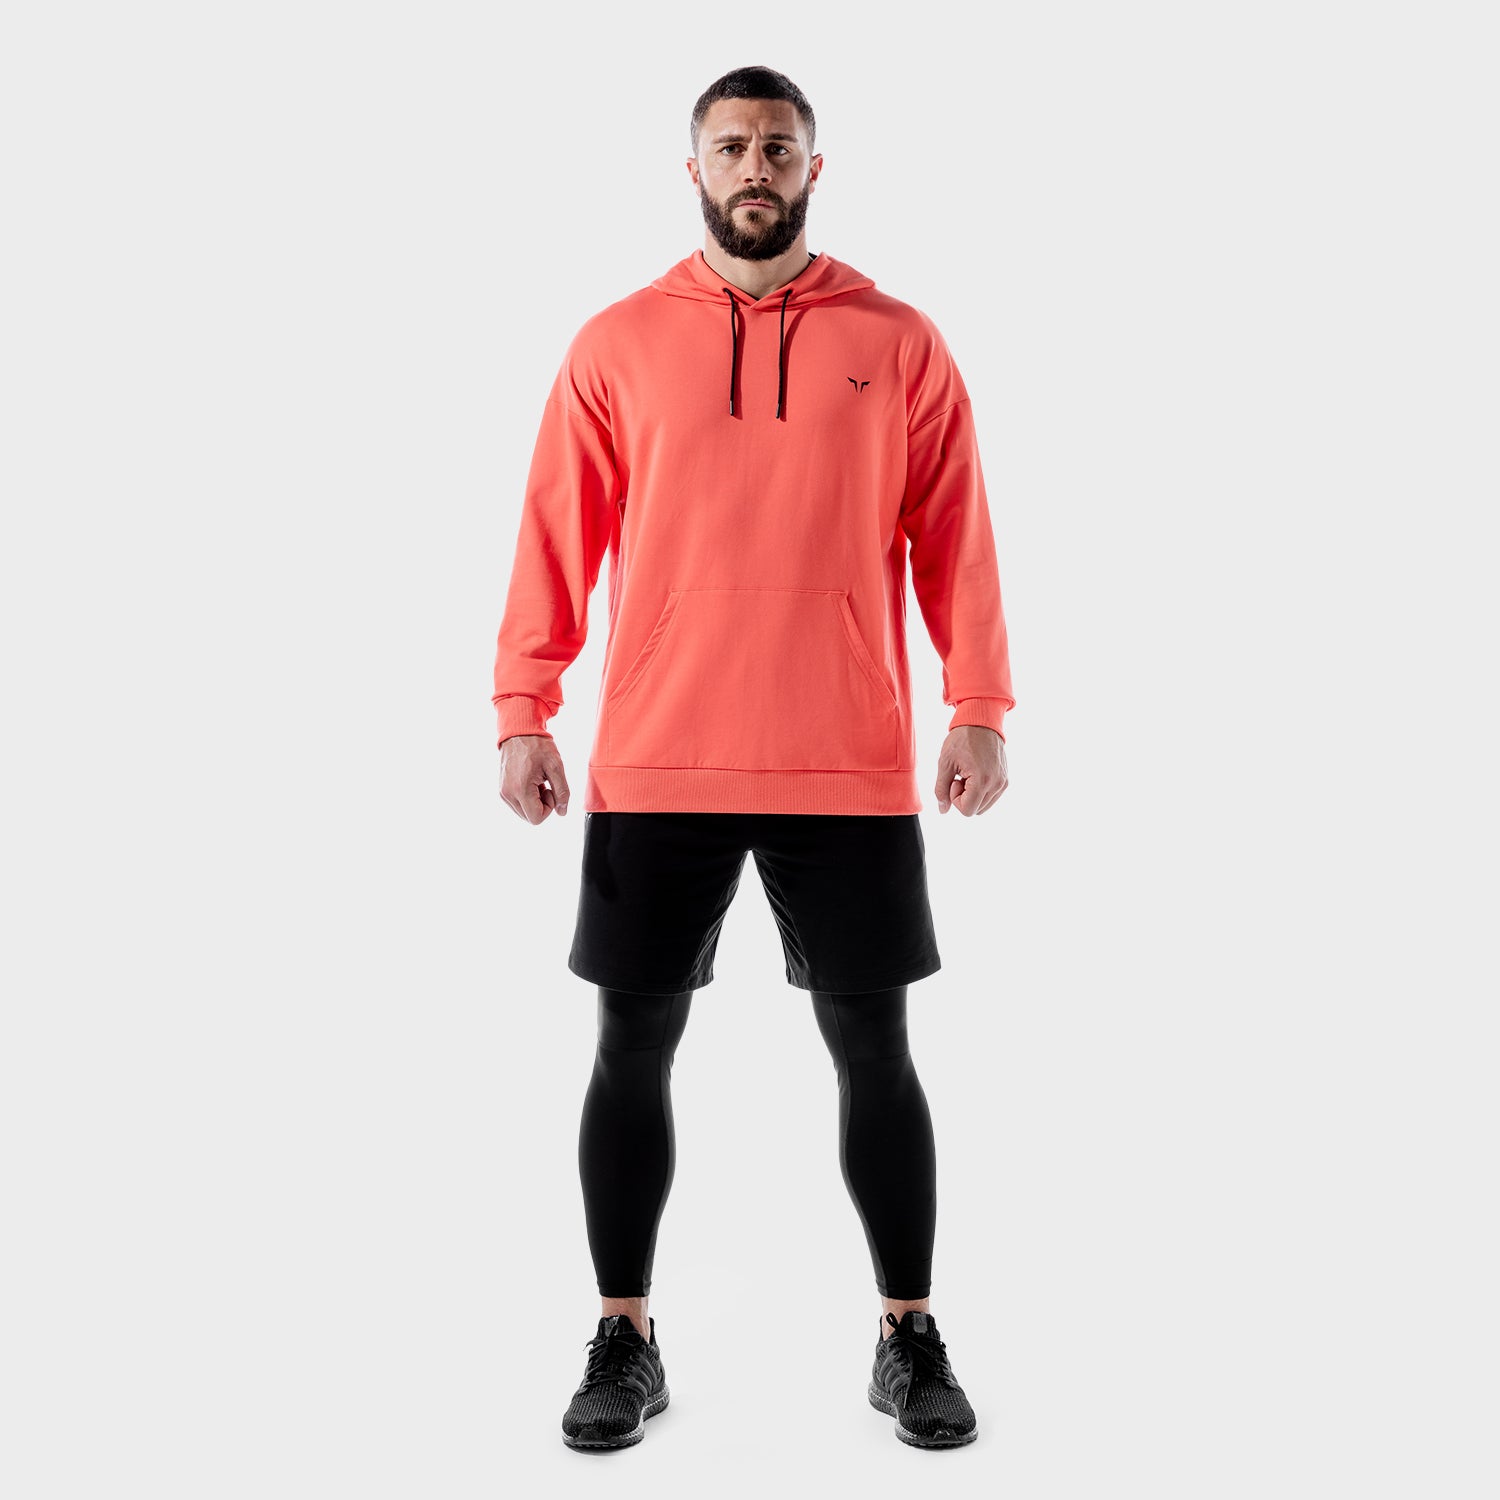 squatwolf-gym-wear-lab-360-hoodie-red-workout-hoodies-for-men